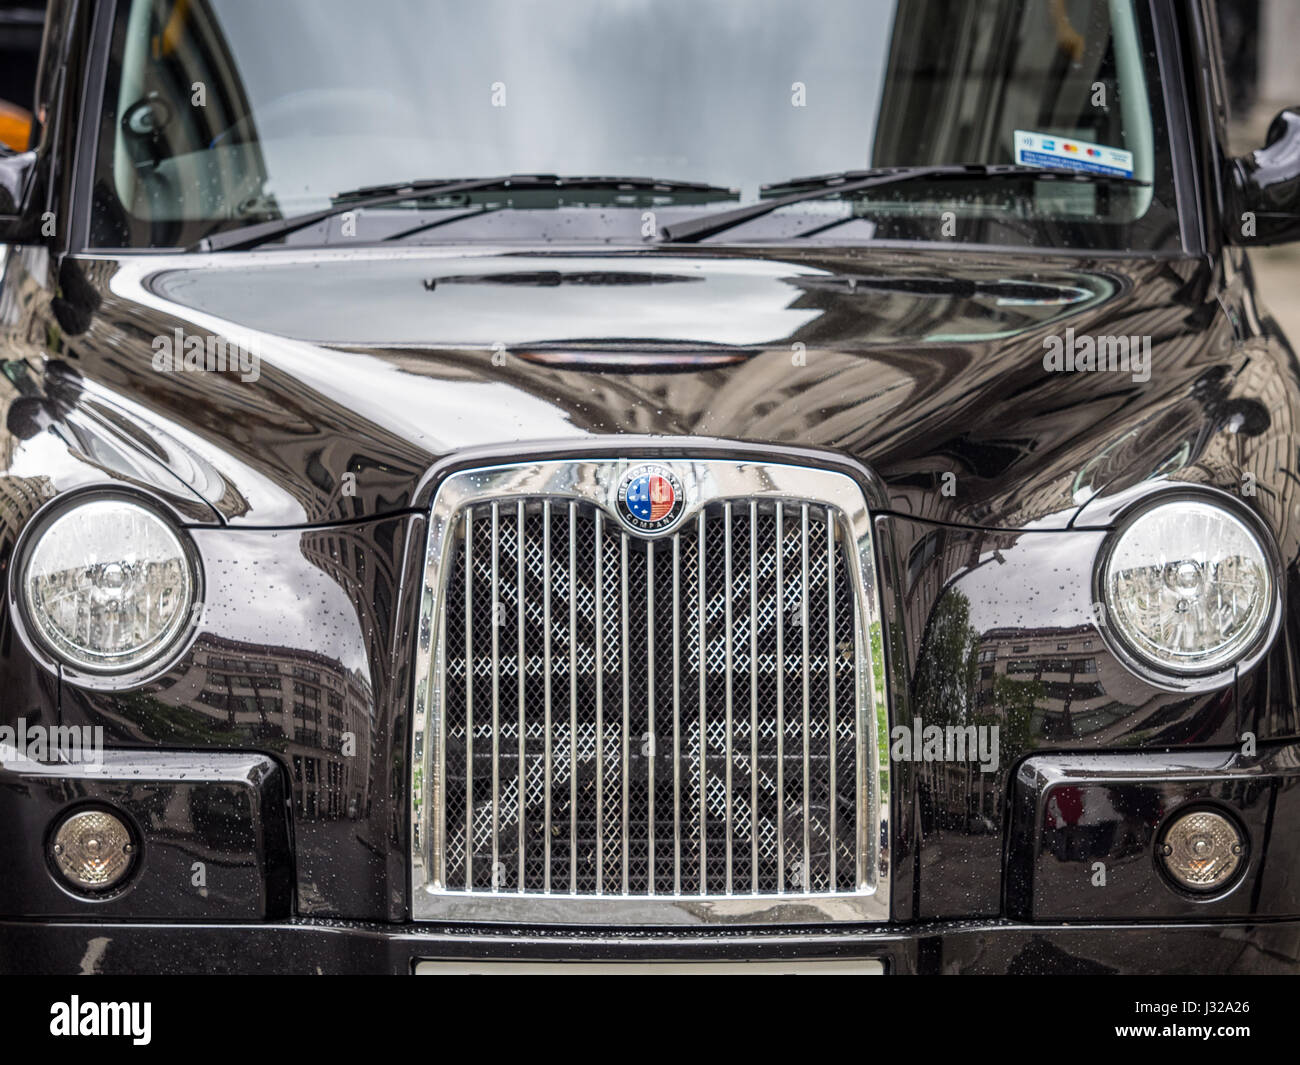 London Taxi Black Cab with a Union Jack graphic on the radiator grill. The  taxi is a London Taxi Company TX4 Limited Edition Stock Photo - Alamy